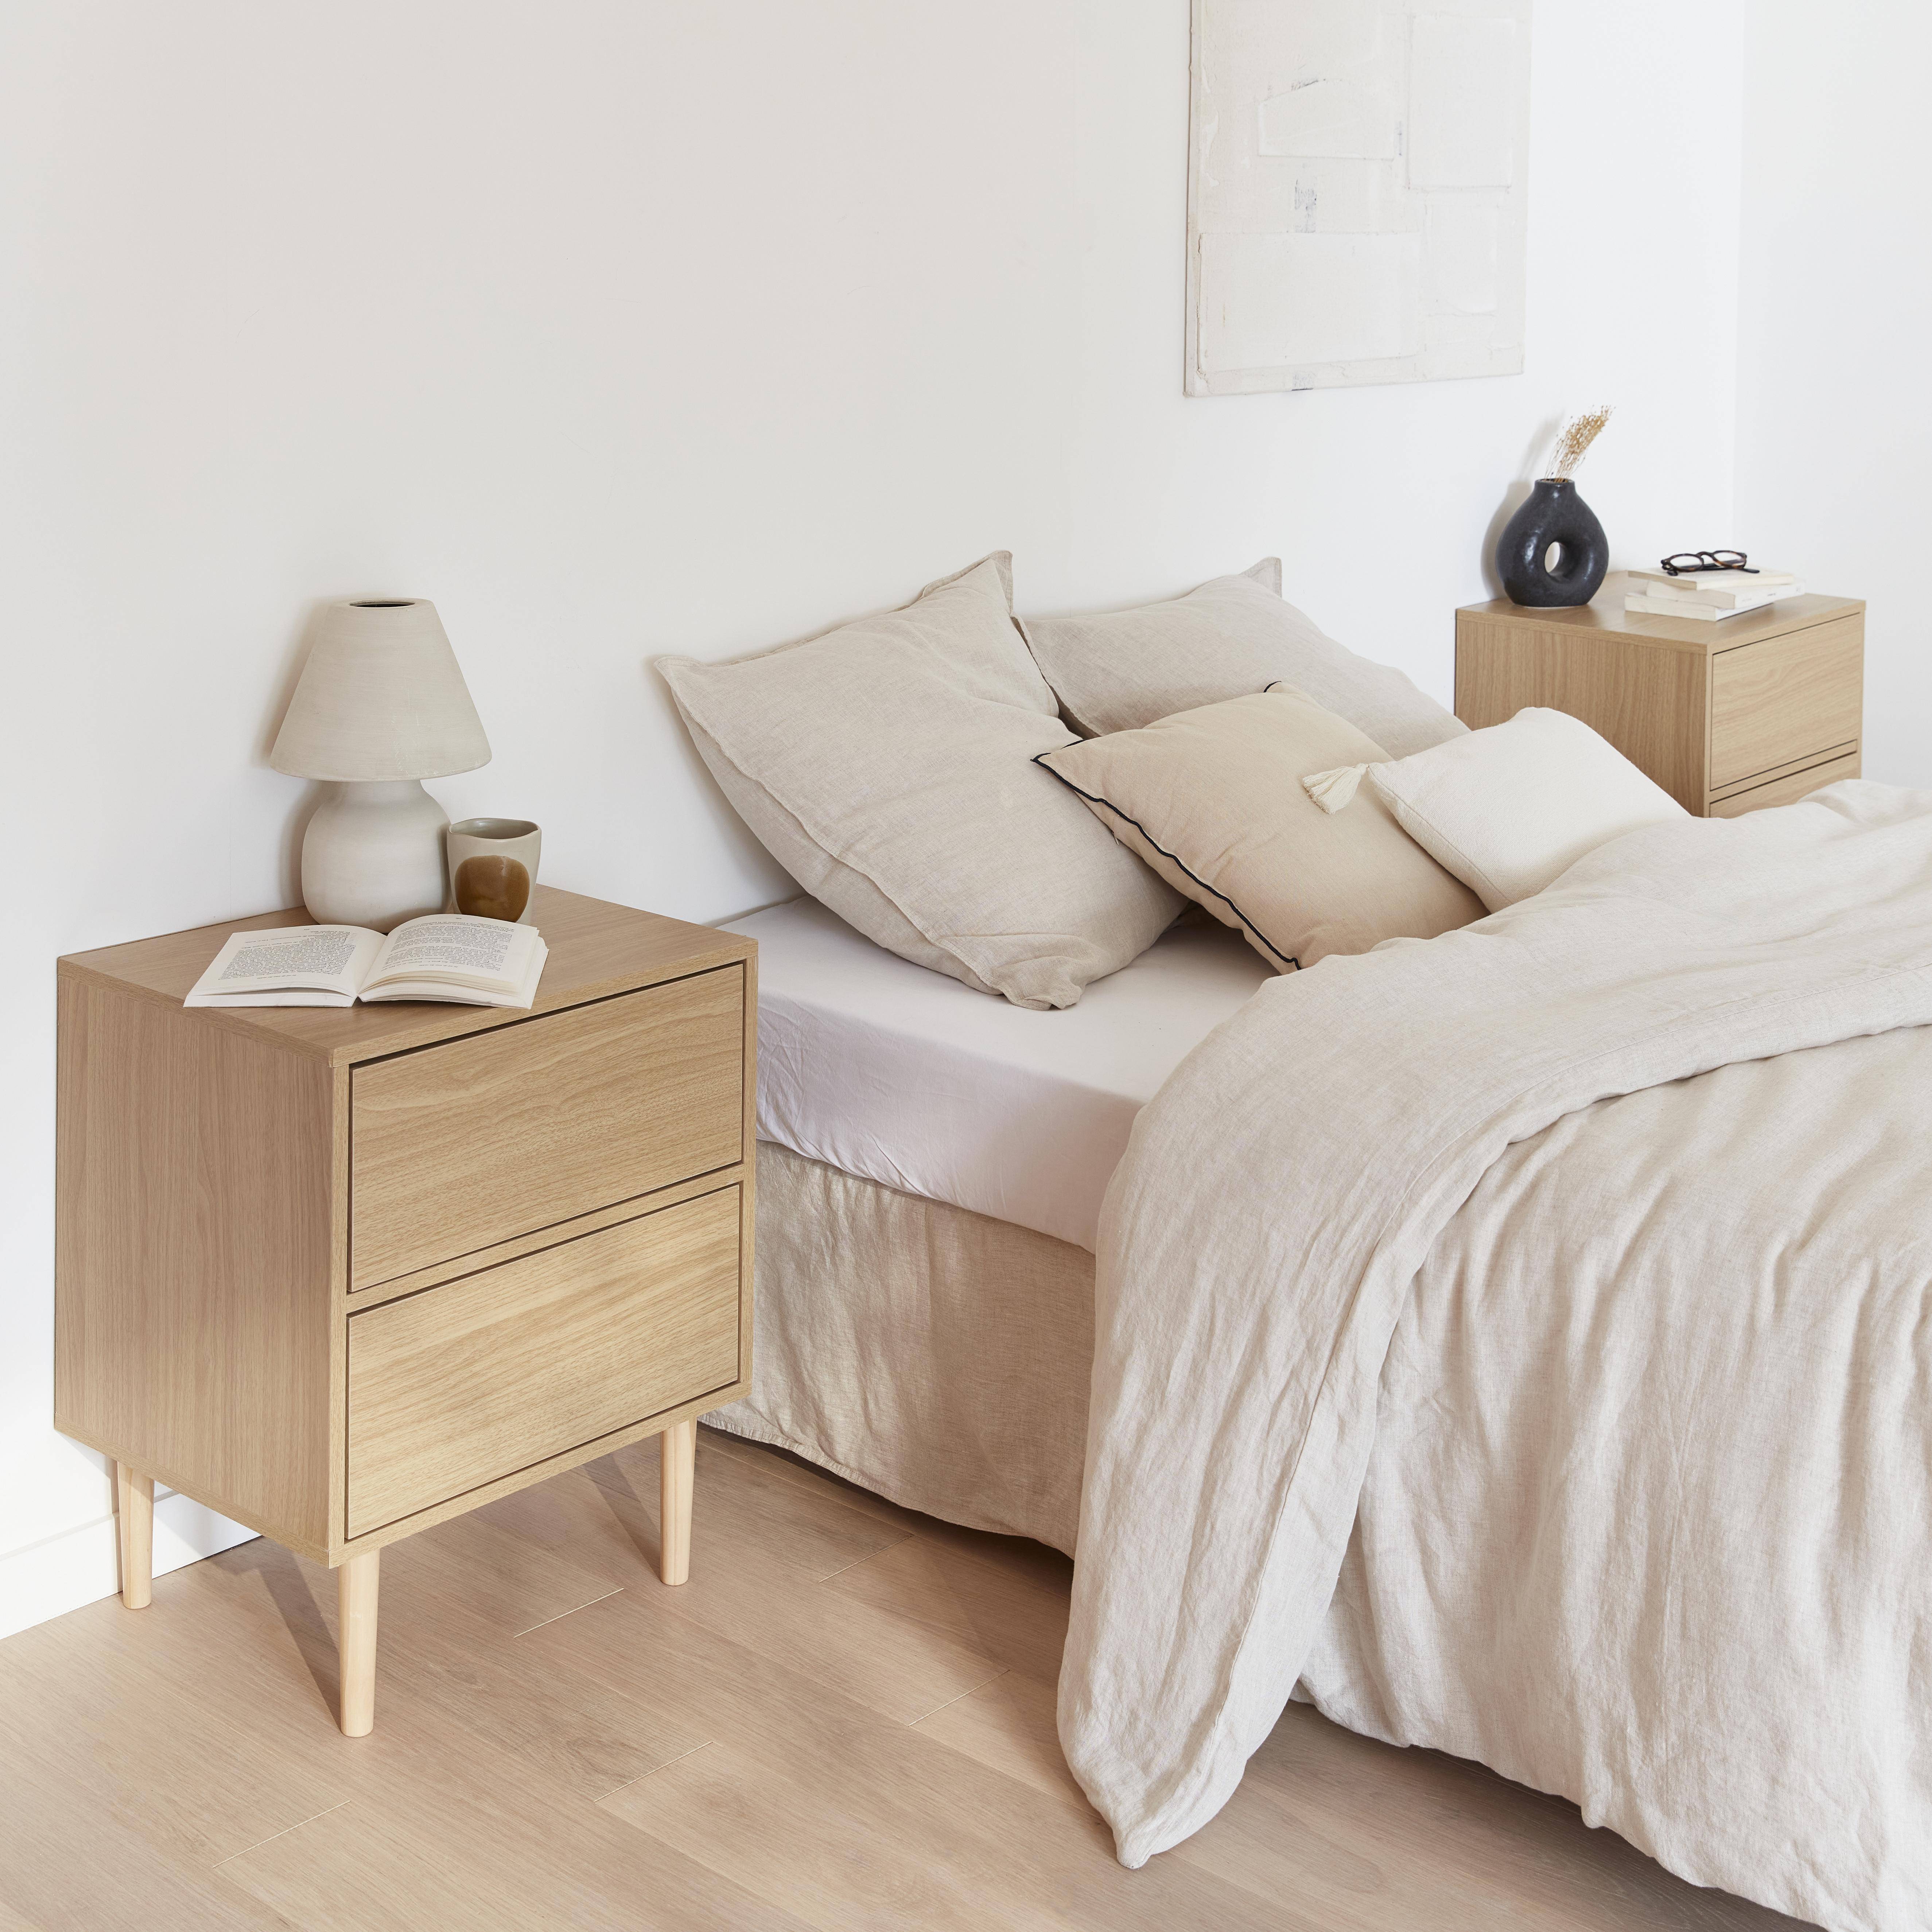 Pair of wood-effect bedside tables with two drawers, 48x40x59cm - Mika - Natural Wood,sweeek,Photo2